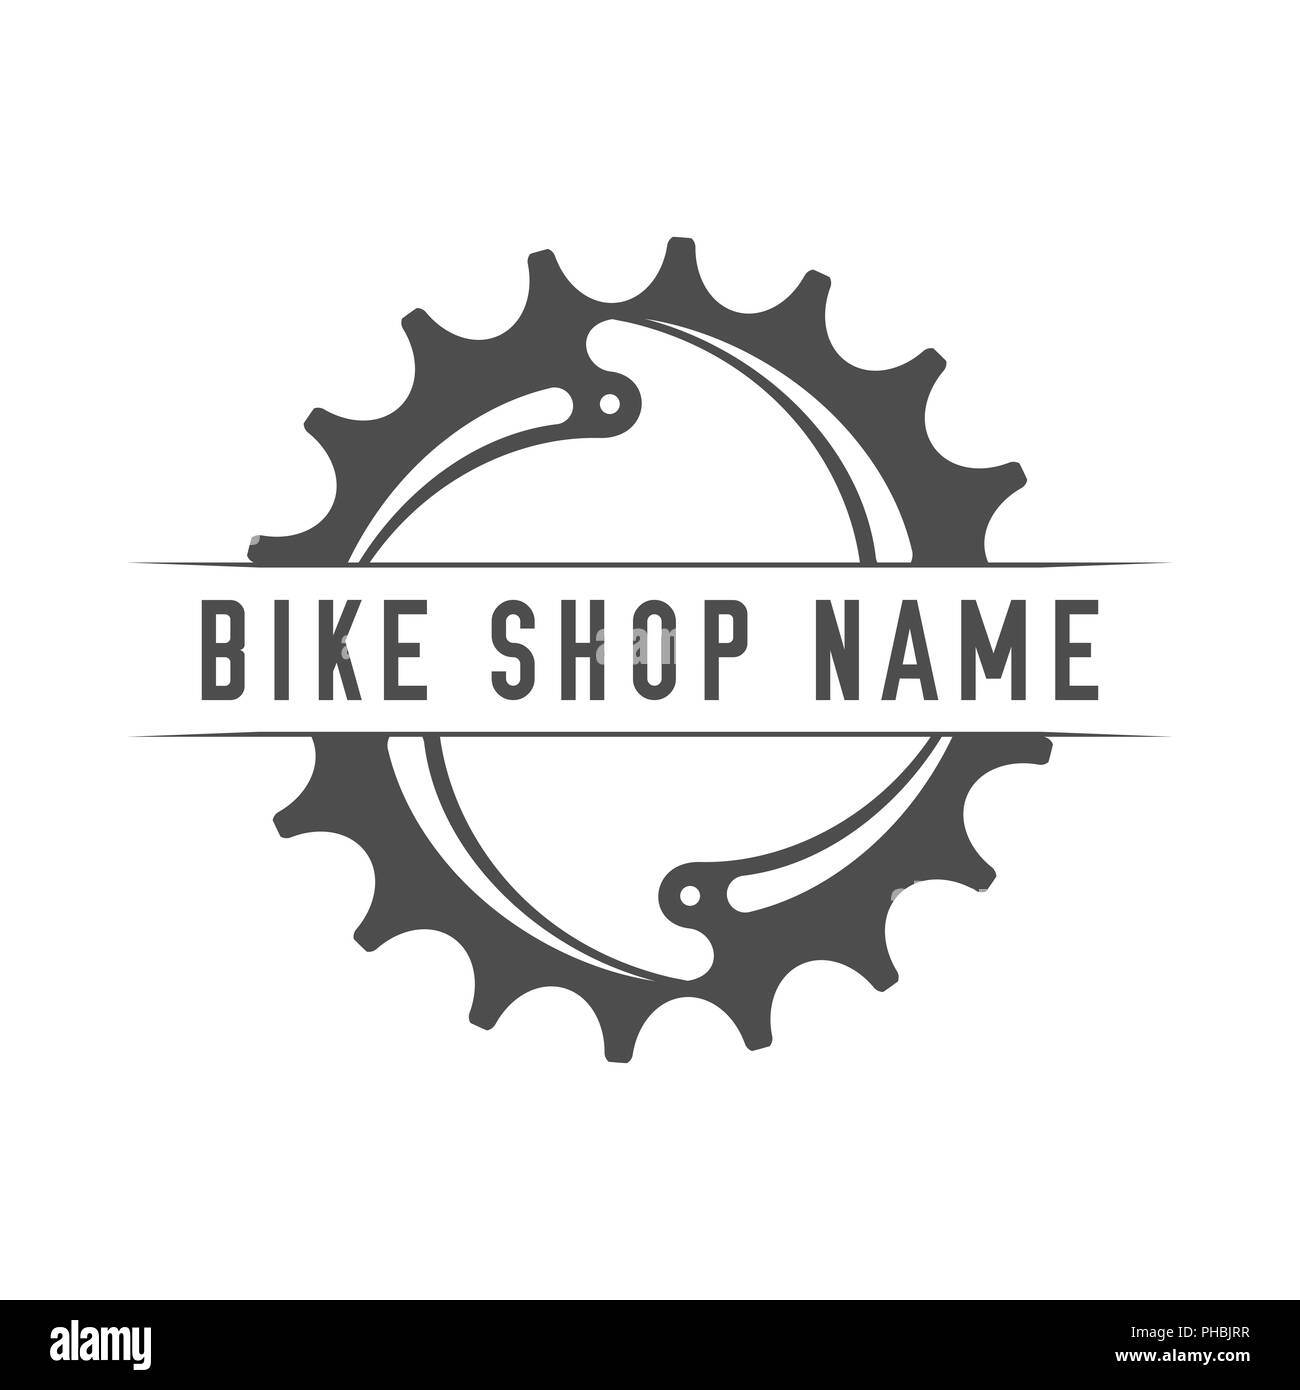 Bikes Shop Emblem. Design Element for Bike Shop or Advertising Banner. Chainring and Place for Your Bike Shop Name, Monochrome Illustration. Stock Photo